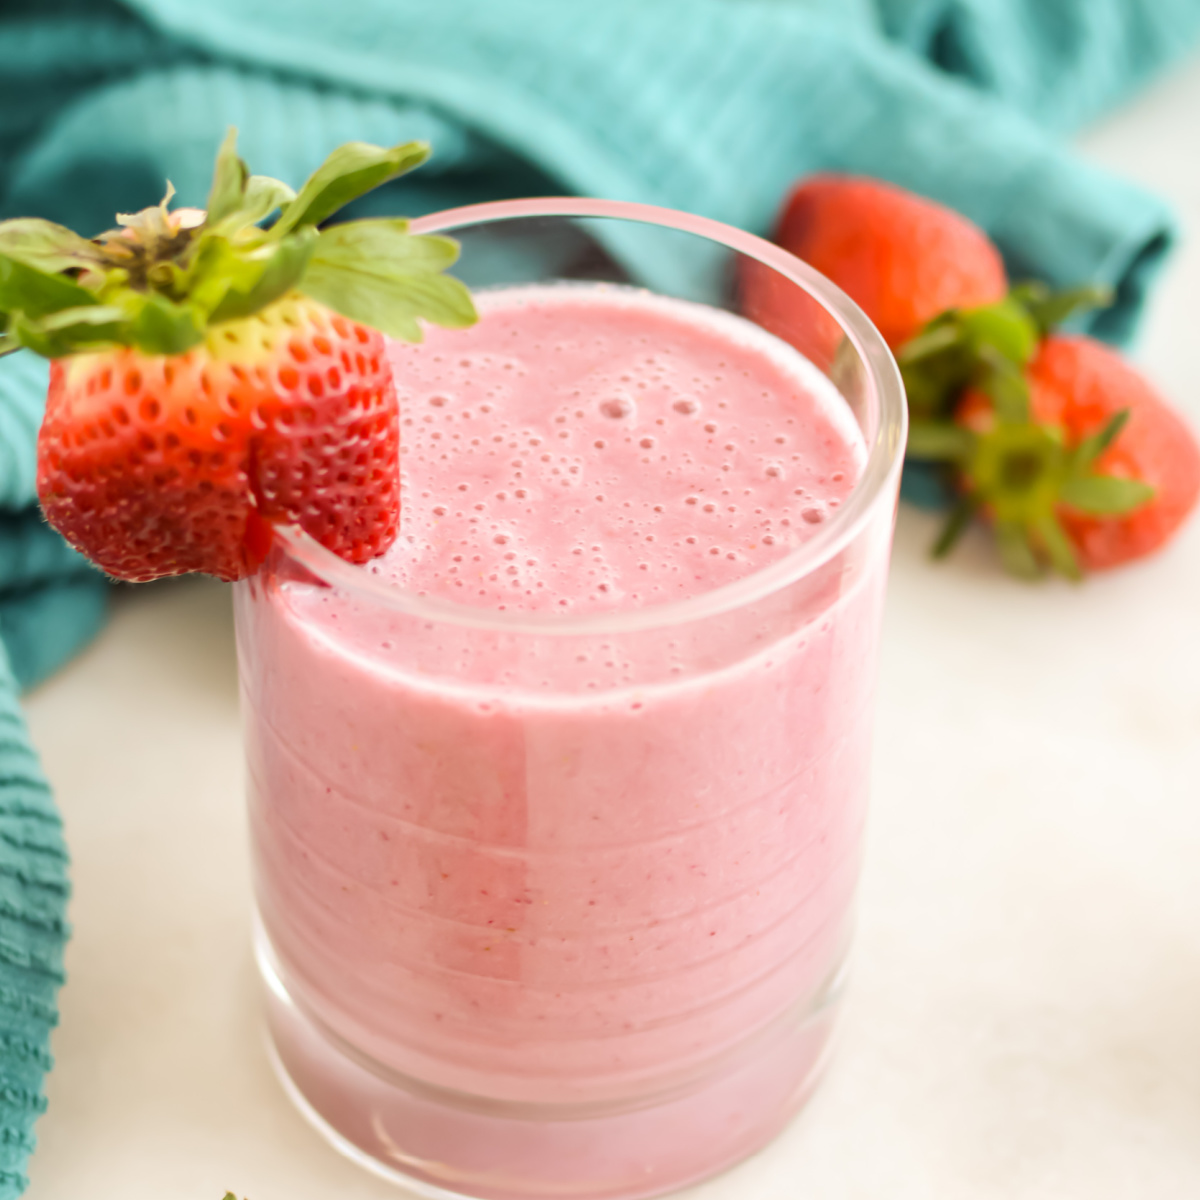 Close up of Strawberry Banana Smoothie in a small glass.